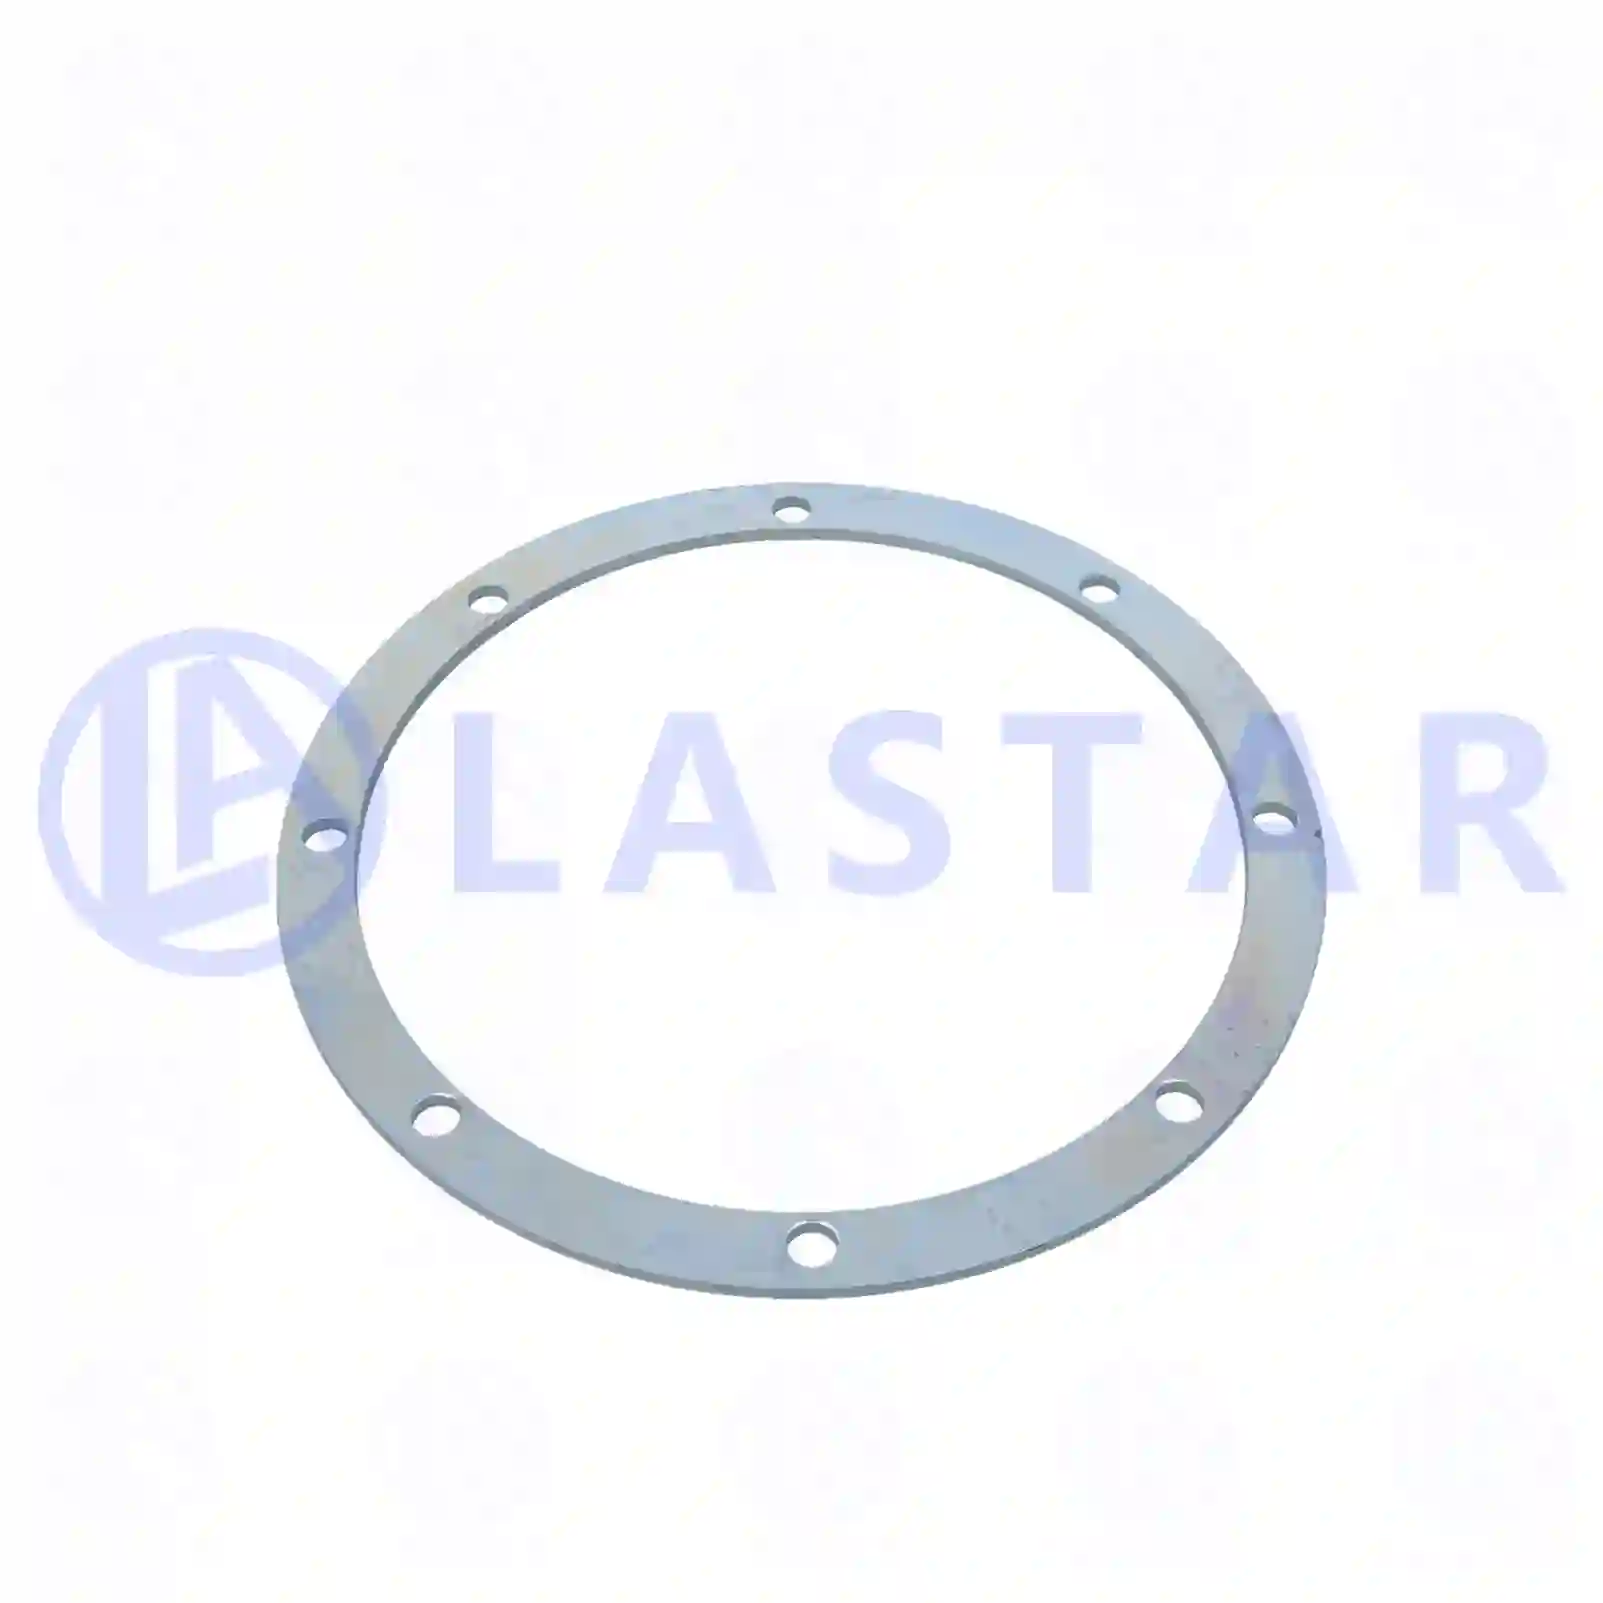 Ring, hub cover, 77729105, 1590508, ZG30133-0008, ||  77729105 Lastar Spare Part | Truck Spare Parts, Auotomotive Spare Parts Ring, hub cover, 77729105, 1590508, ZG30133-0008, ||  77729105 Lastar Spare Part | Truck Spare Parts, Auotomotive Spare Parts